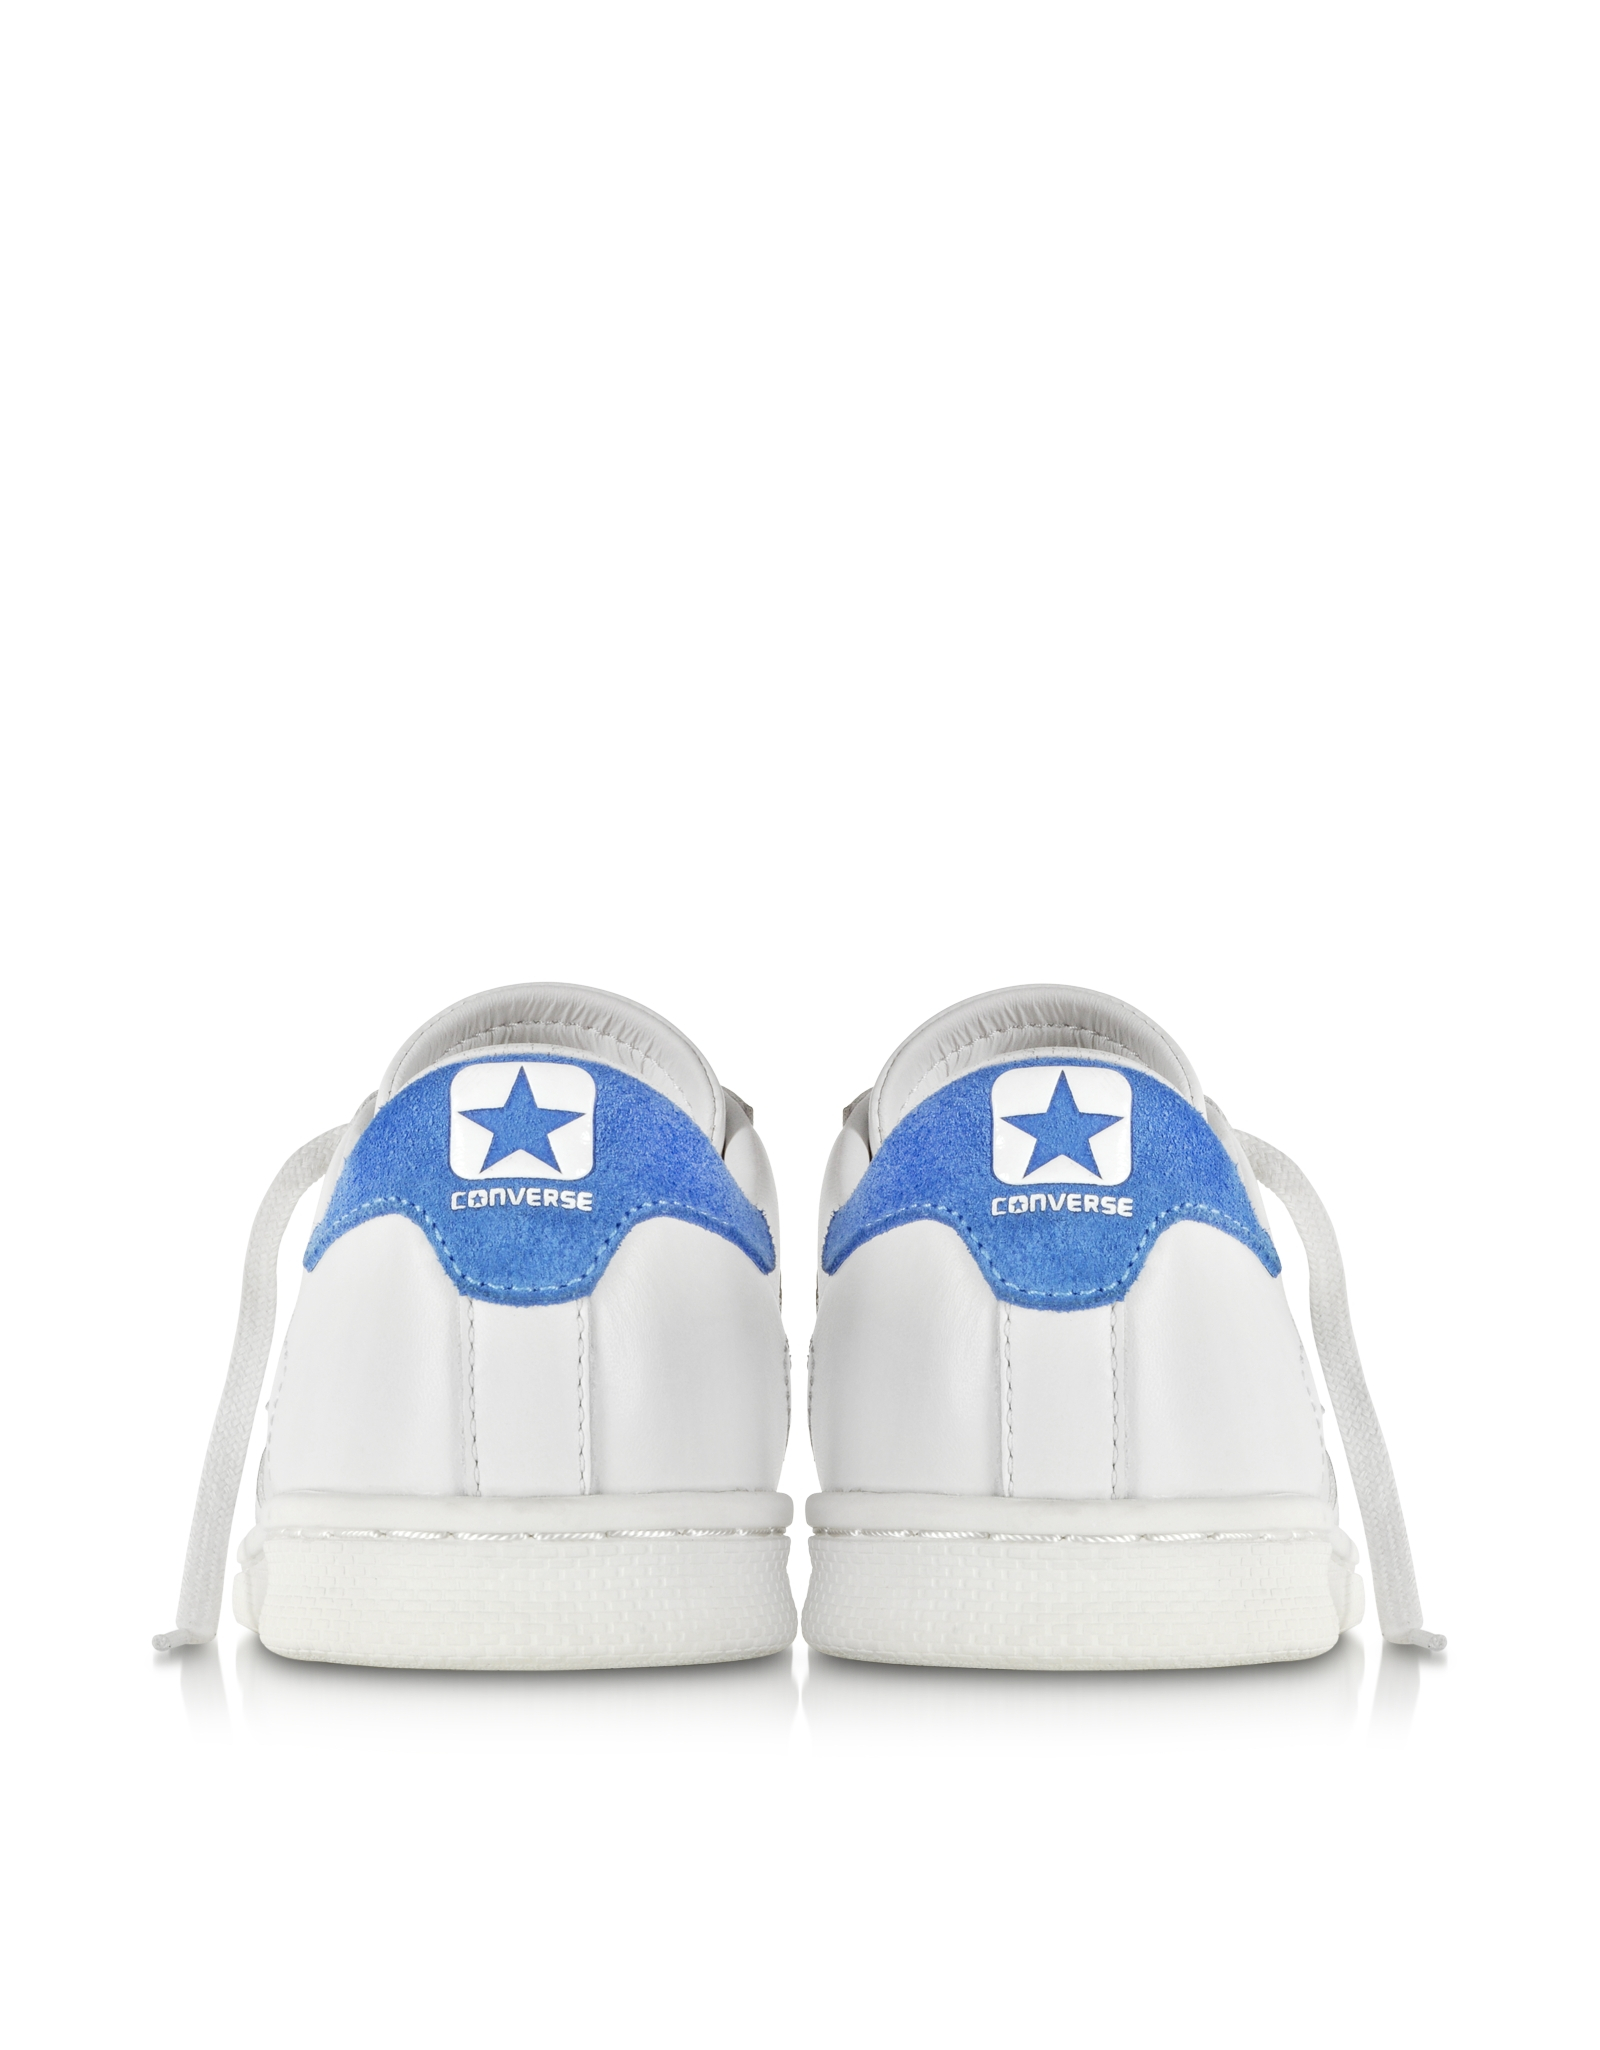 Lyst - Converse Cons Pro Leather Lp Ox White Dust And Light Blue ...